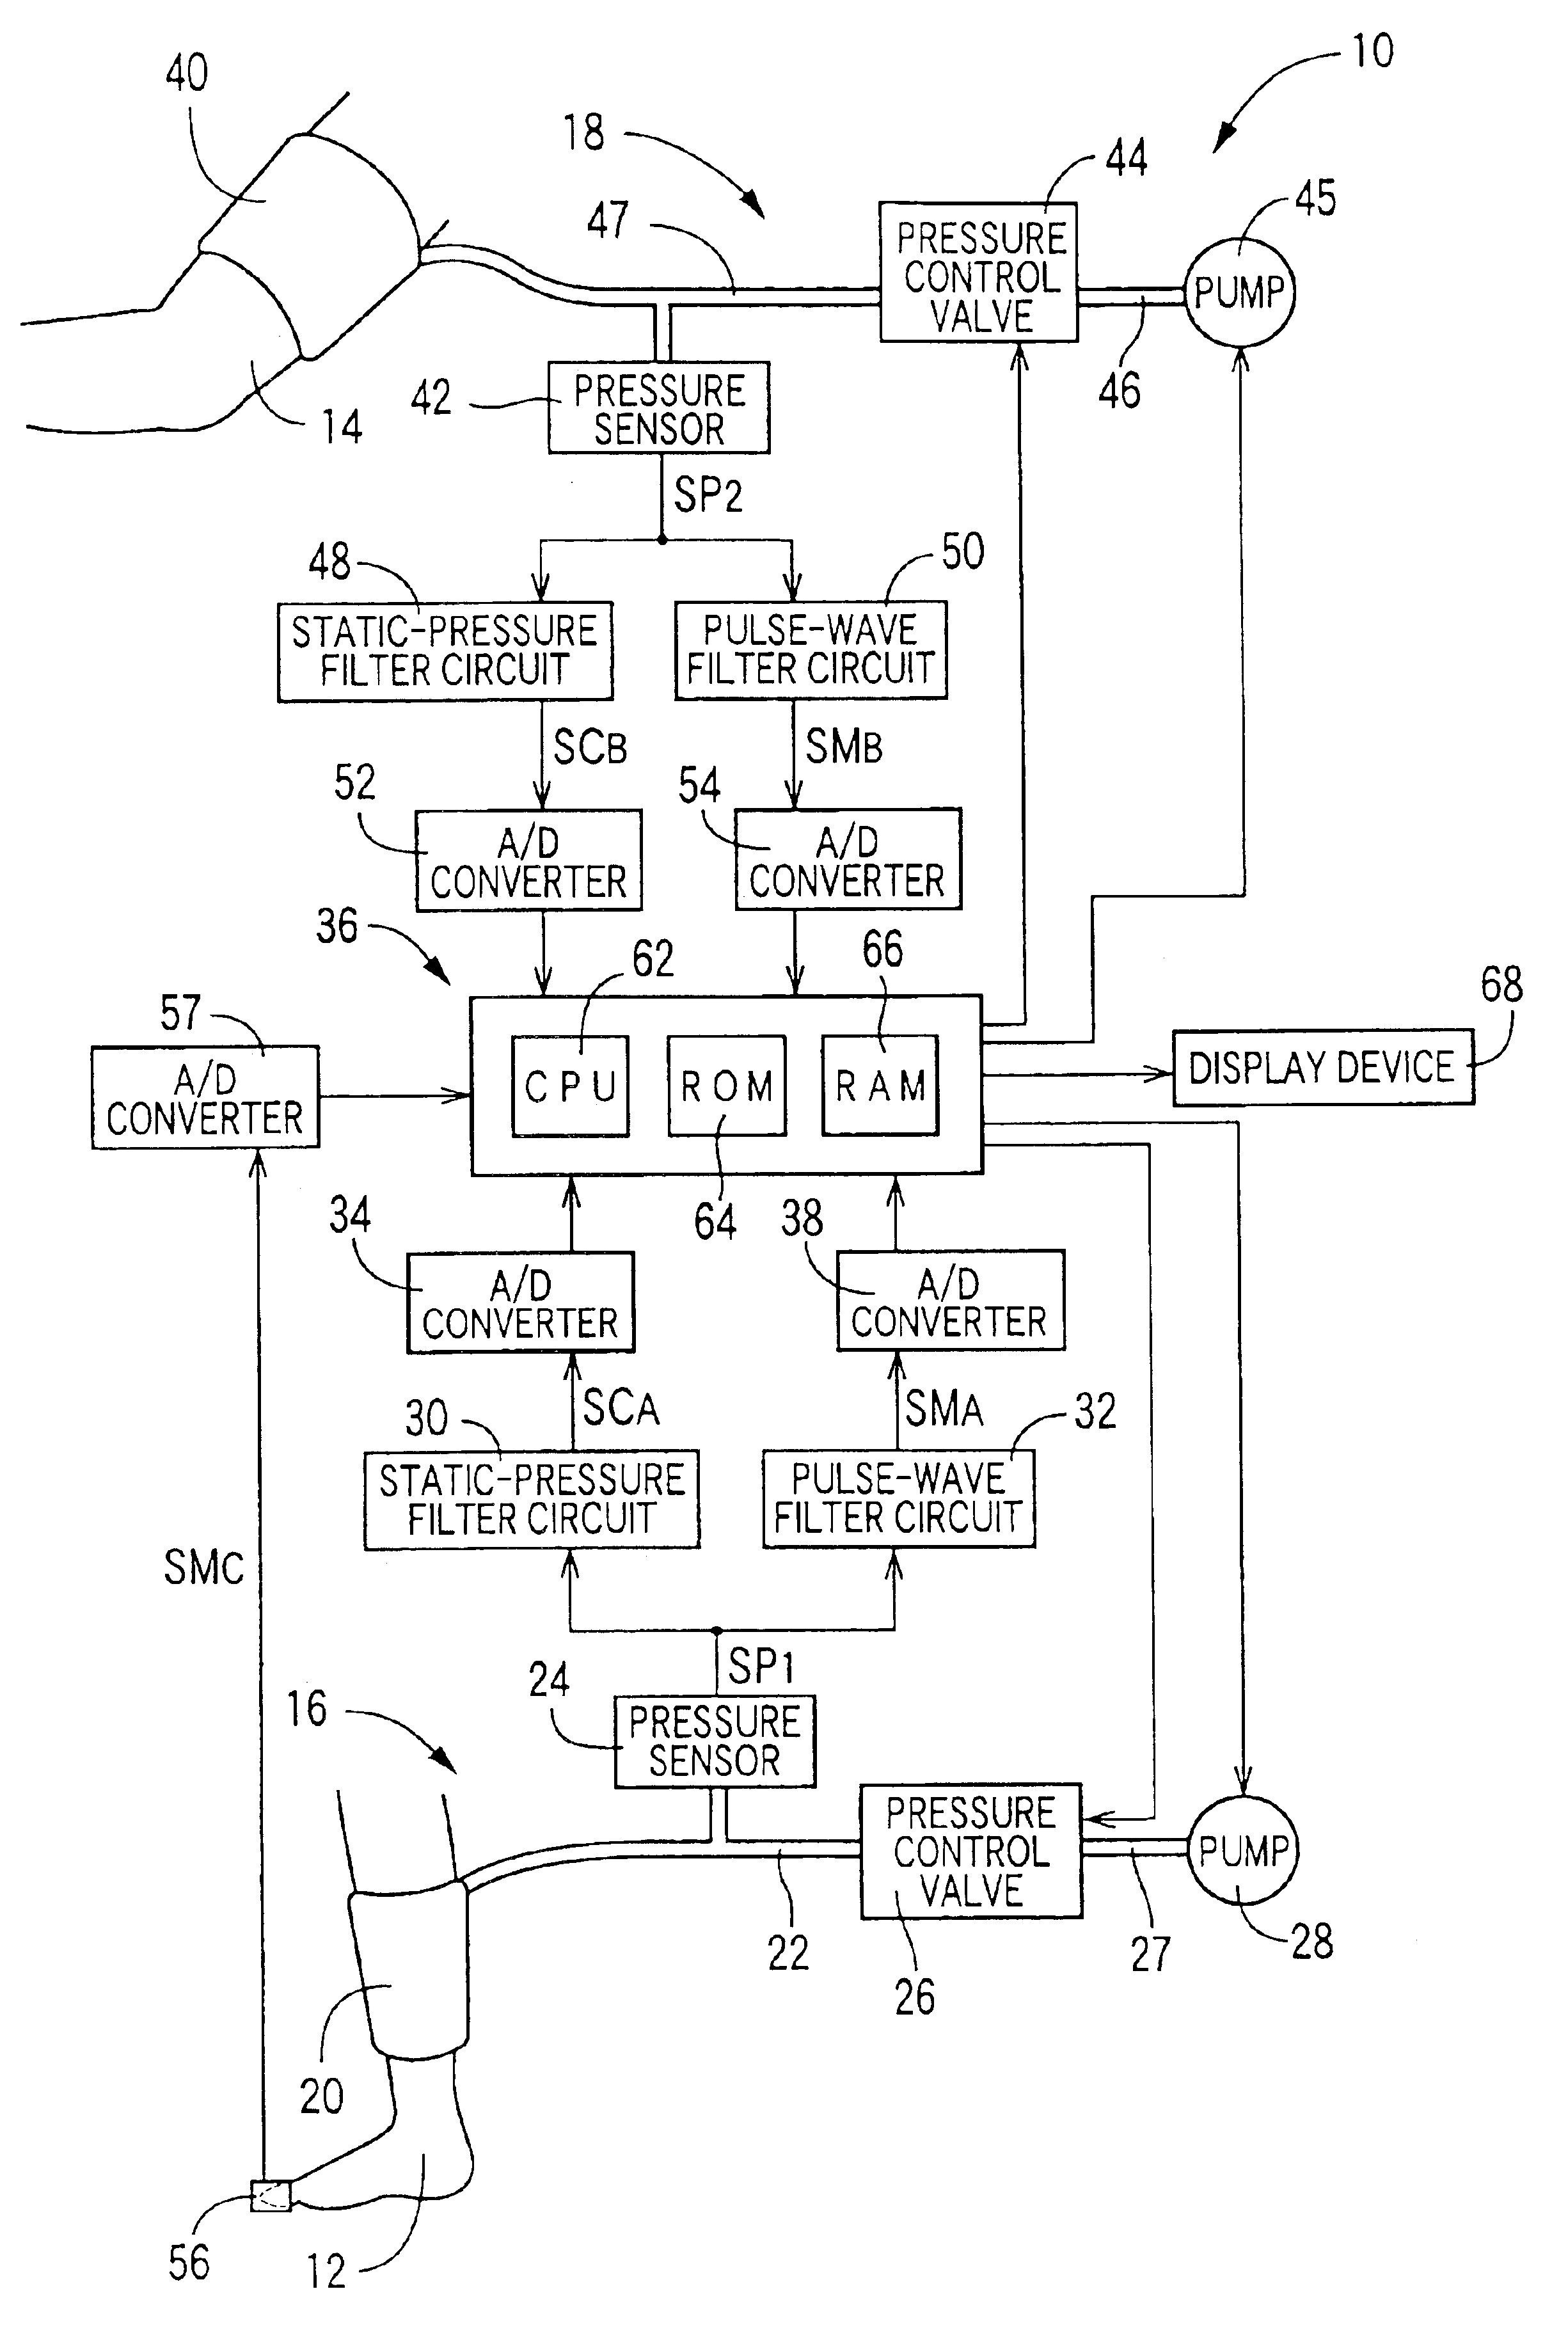 Arteriostenosis inspecting apparatus and ankle-blood-pressure measuring apparatus